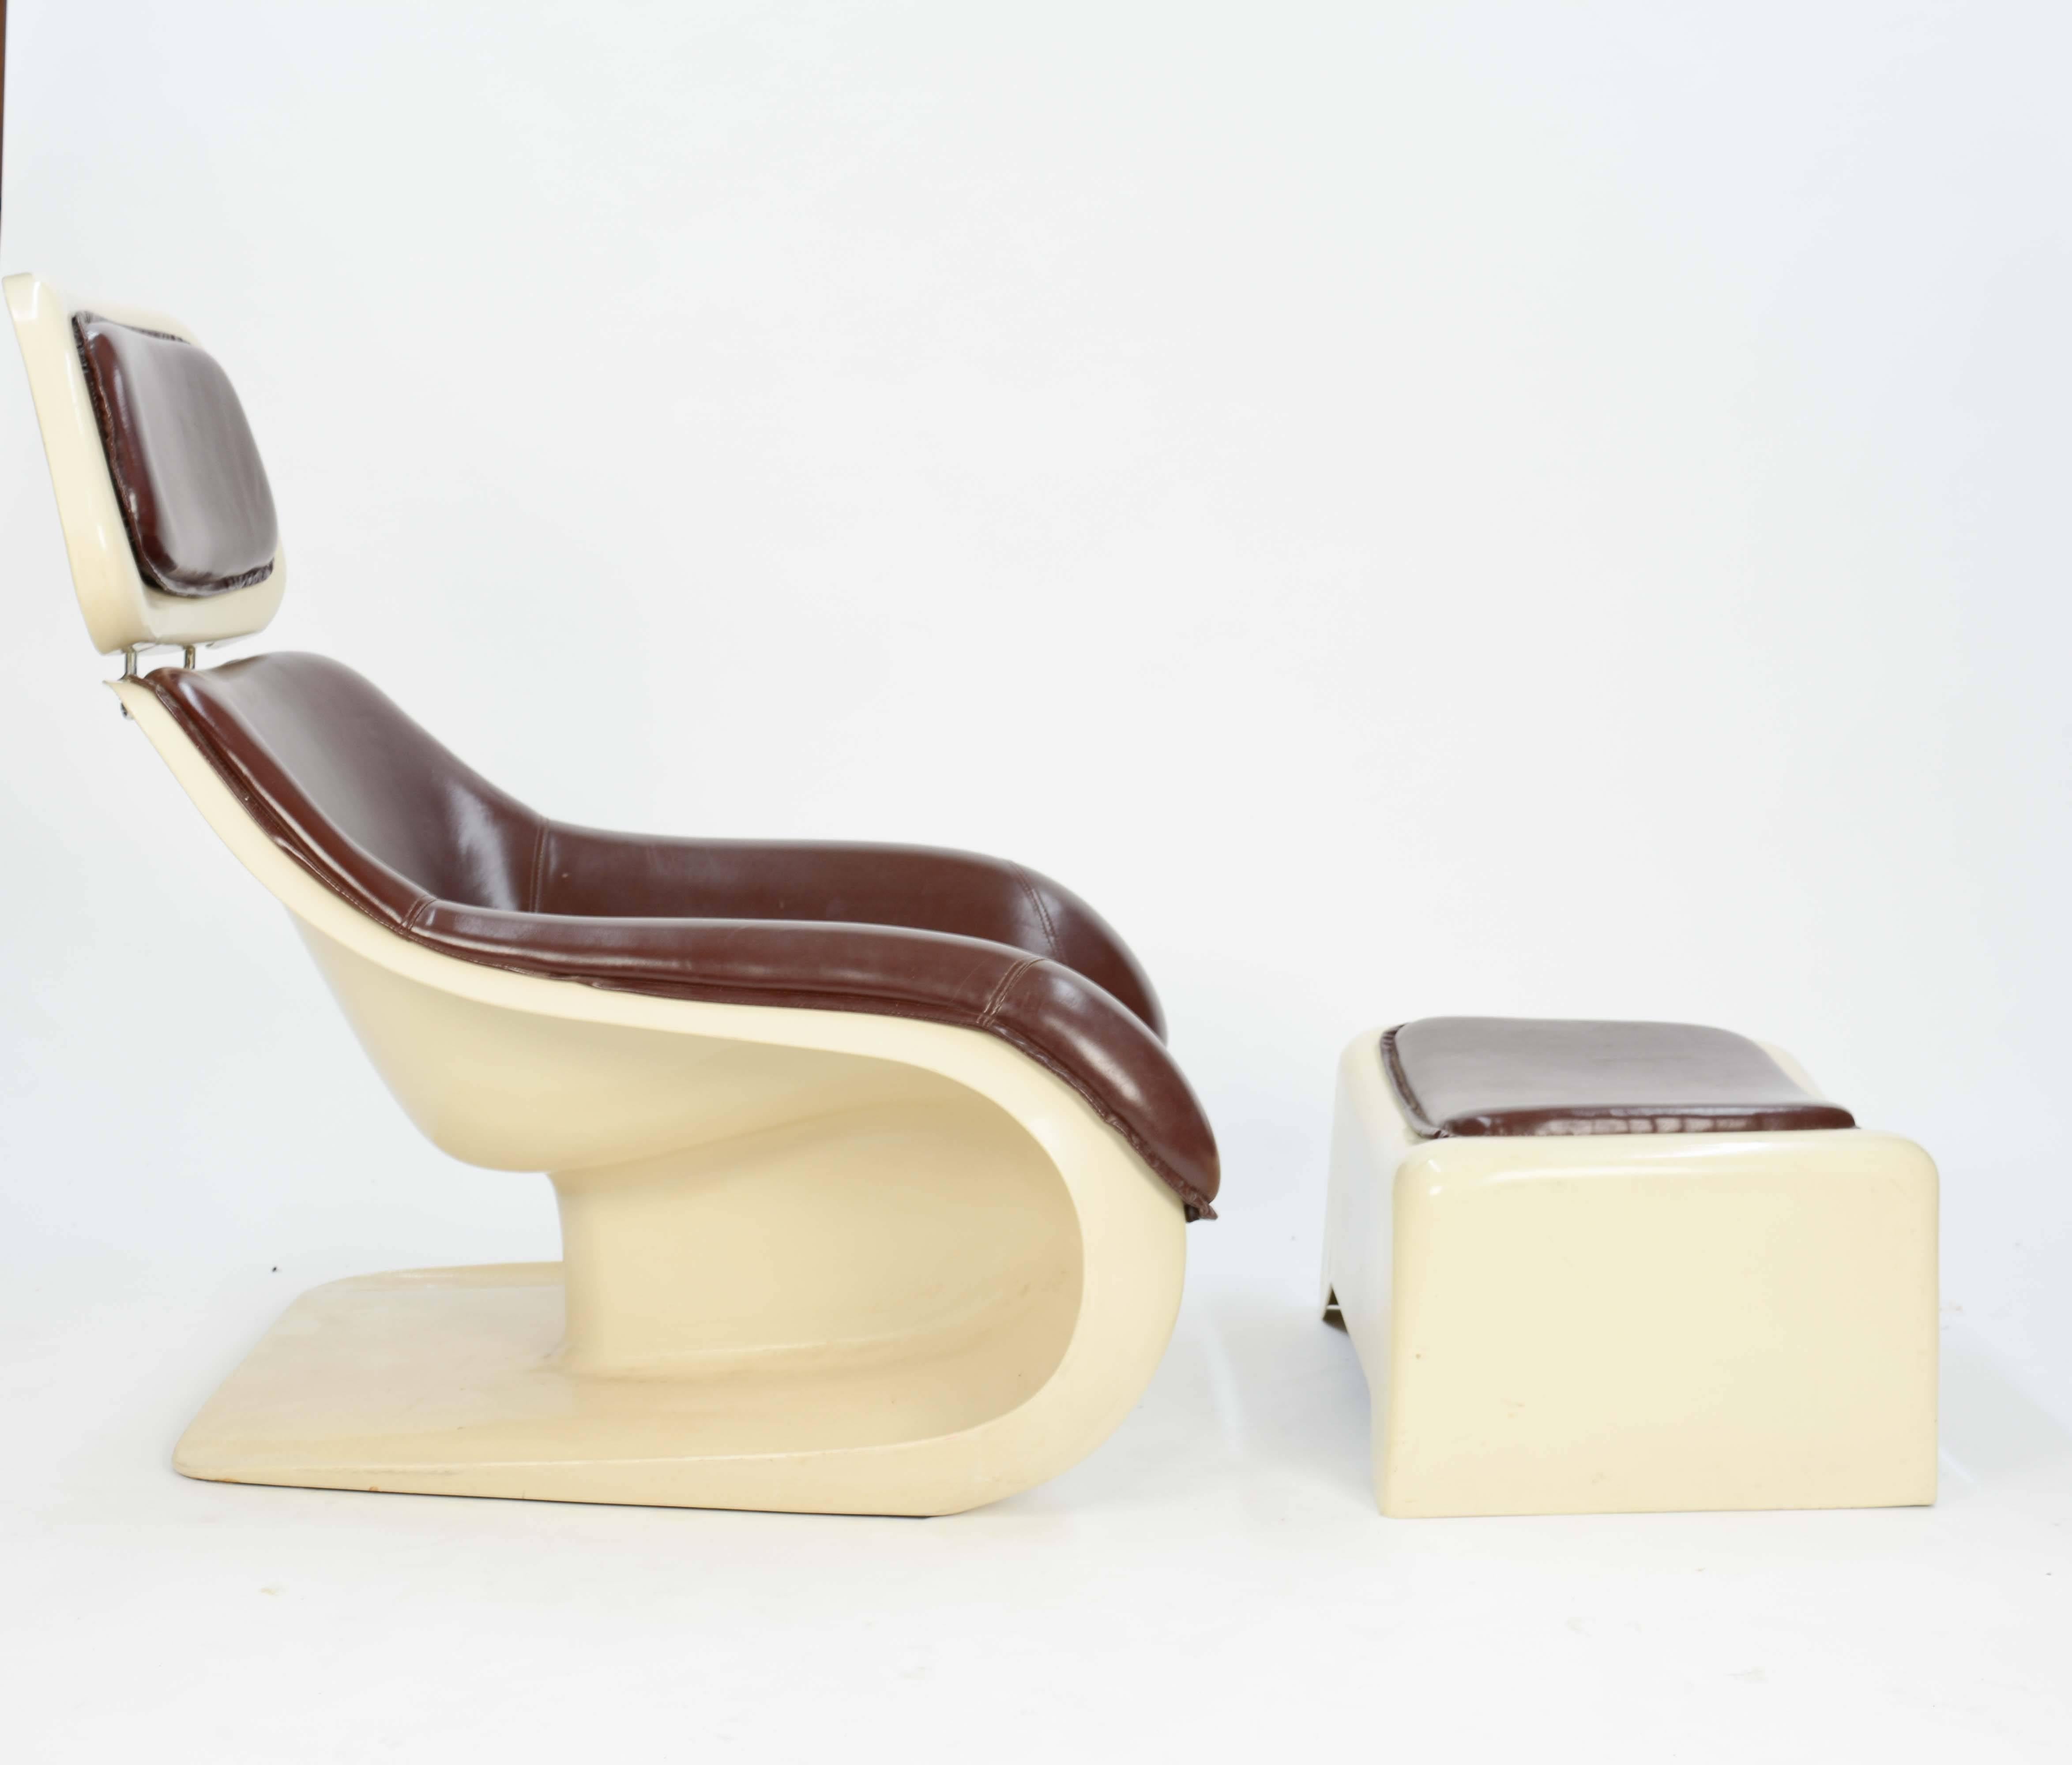 Lounge chair 'Targa', in moulded polyester and leather by Klaus Uredat for Horn Collection, Germany, circa 1971.

Sculptural easy chair by German designer Klaus Uredat. The organic shaped frame is made or molded polyurethane and shows elegant